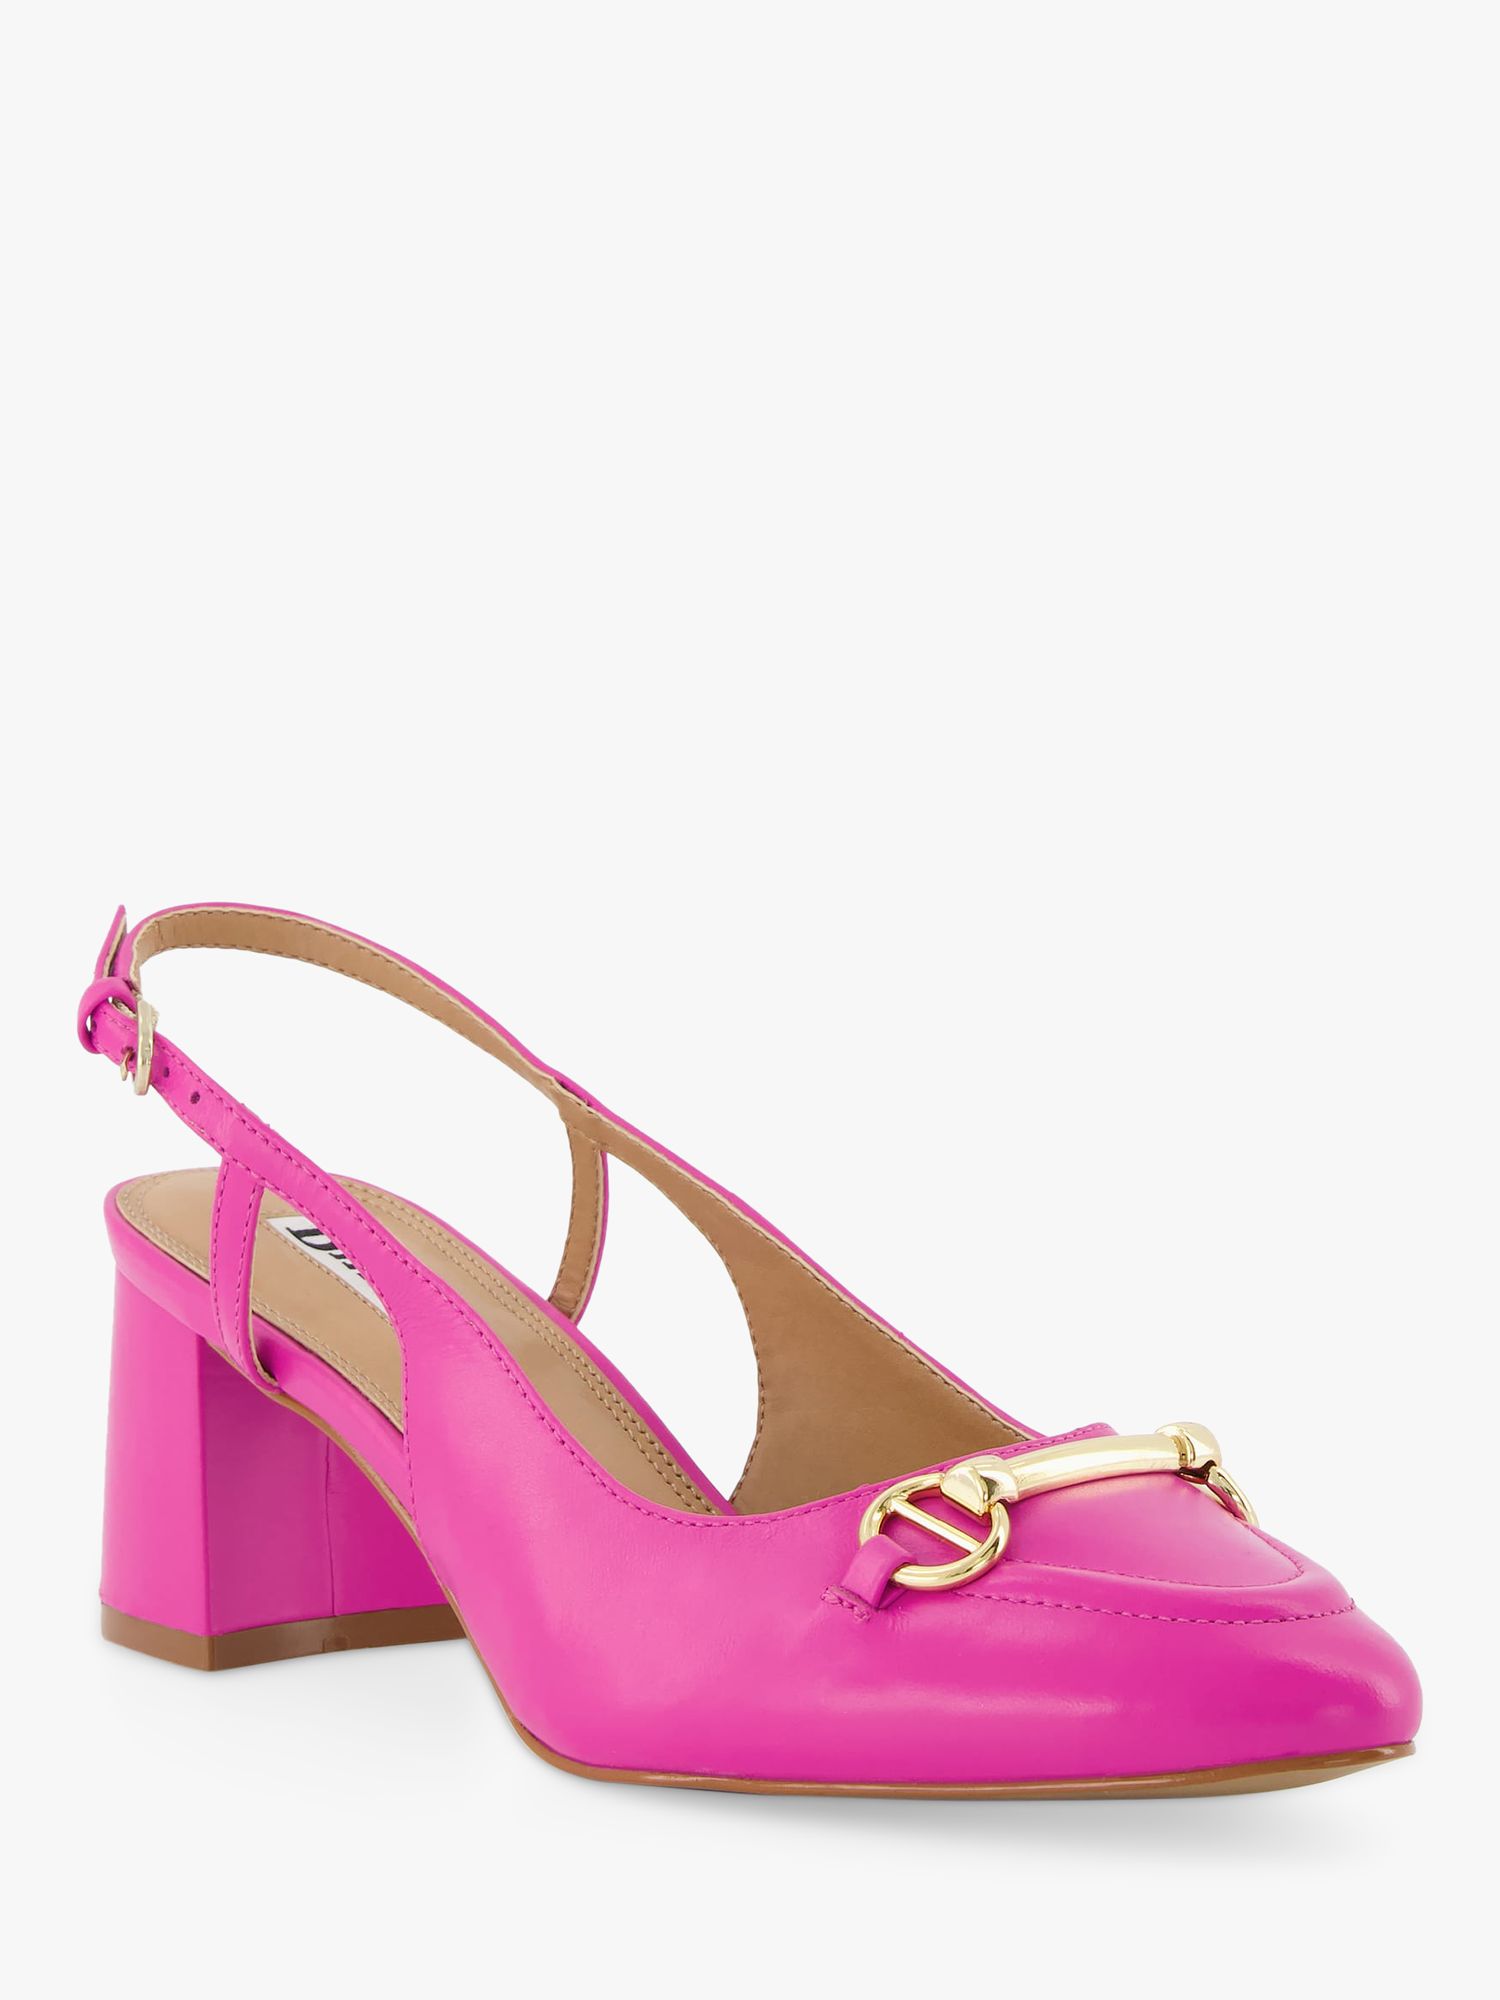 Dune Cassie Leather Sling Back Shoes, Pink